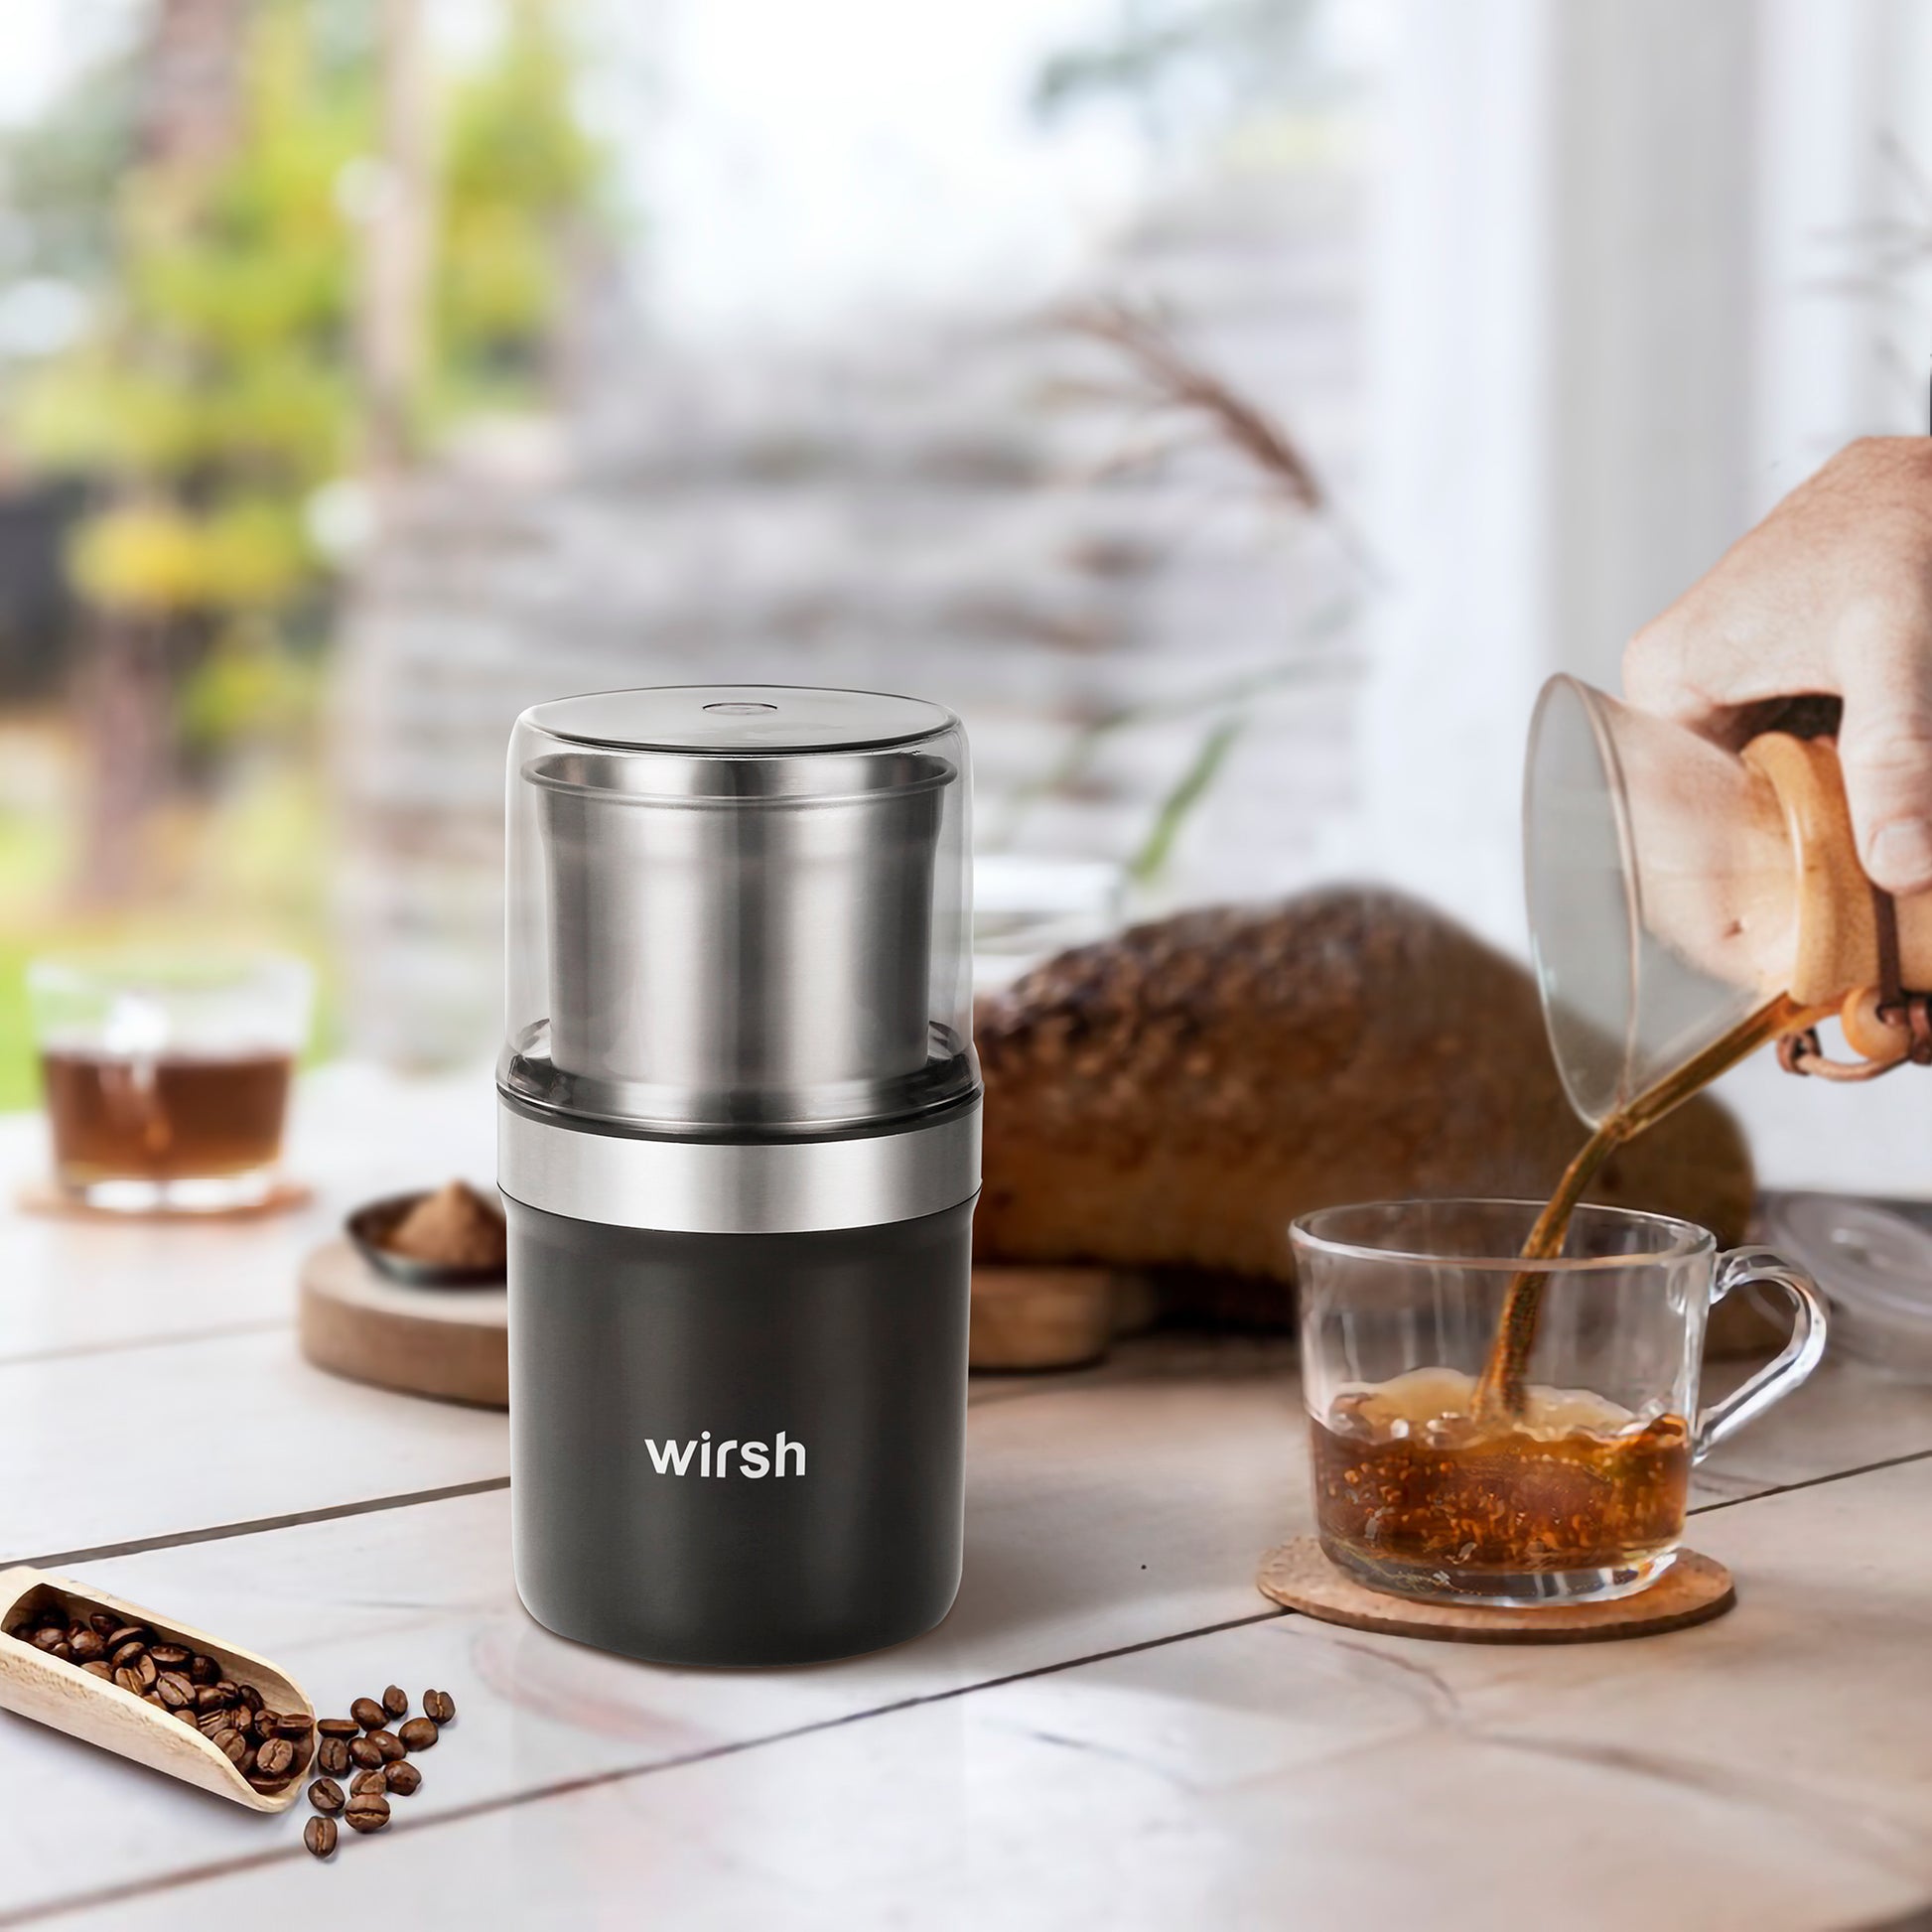 Wirsh Coffee Grinder – with 5.3oz. Stainless Steel Removable Bowl, 200W Electric Grinder